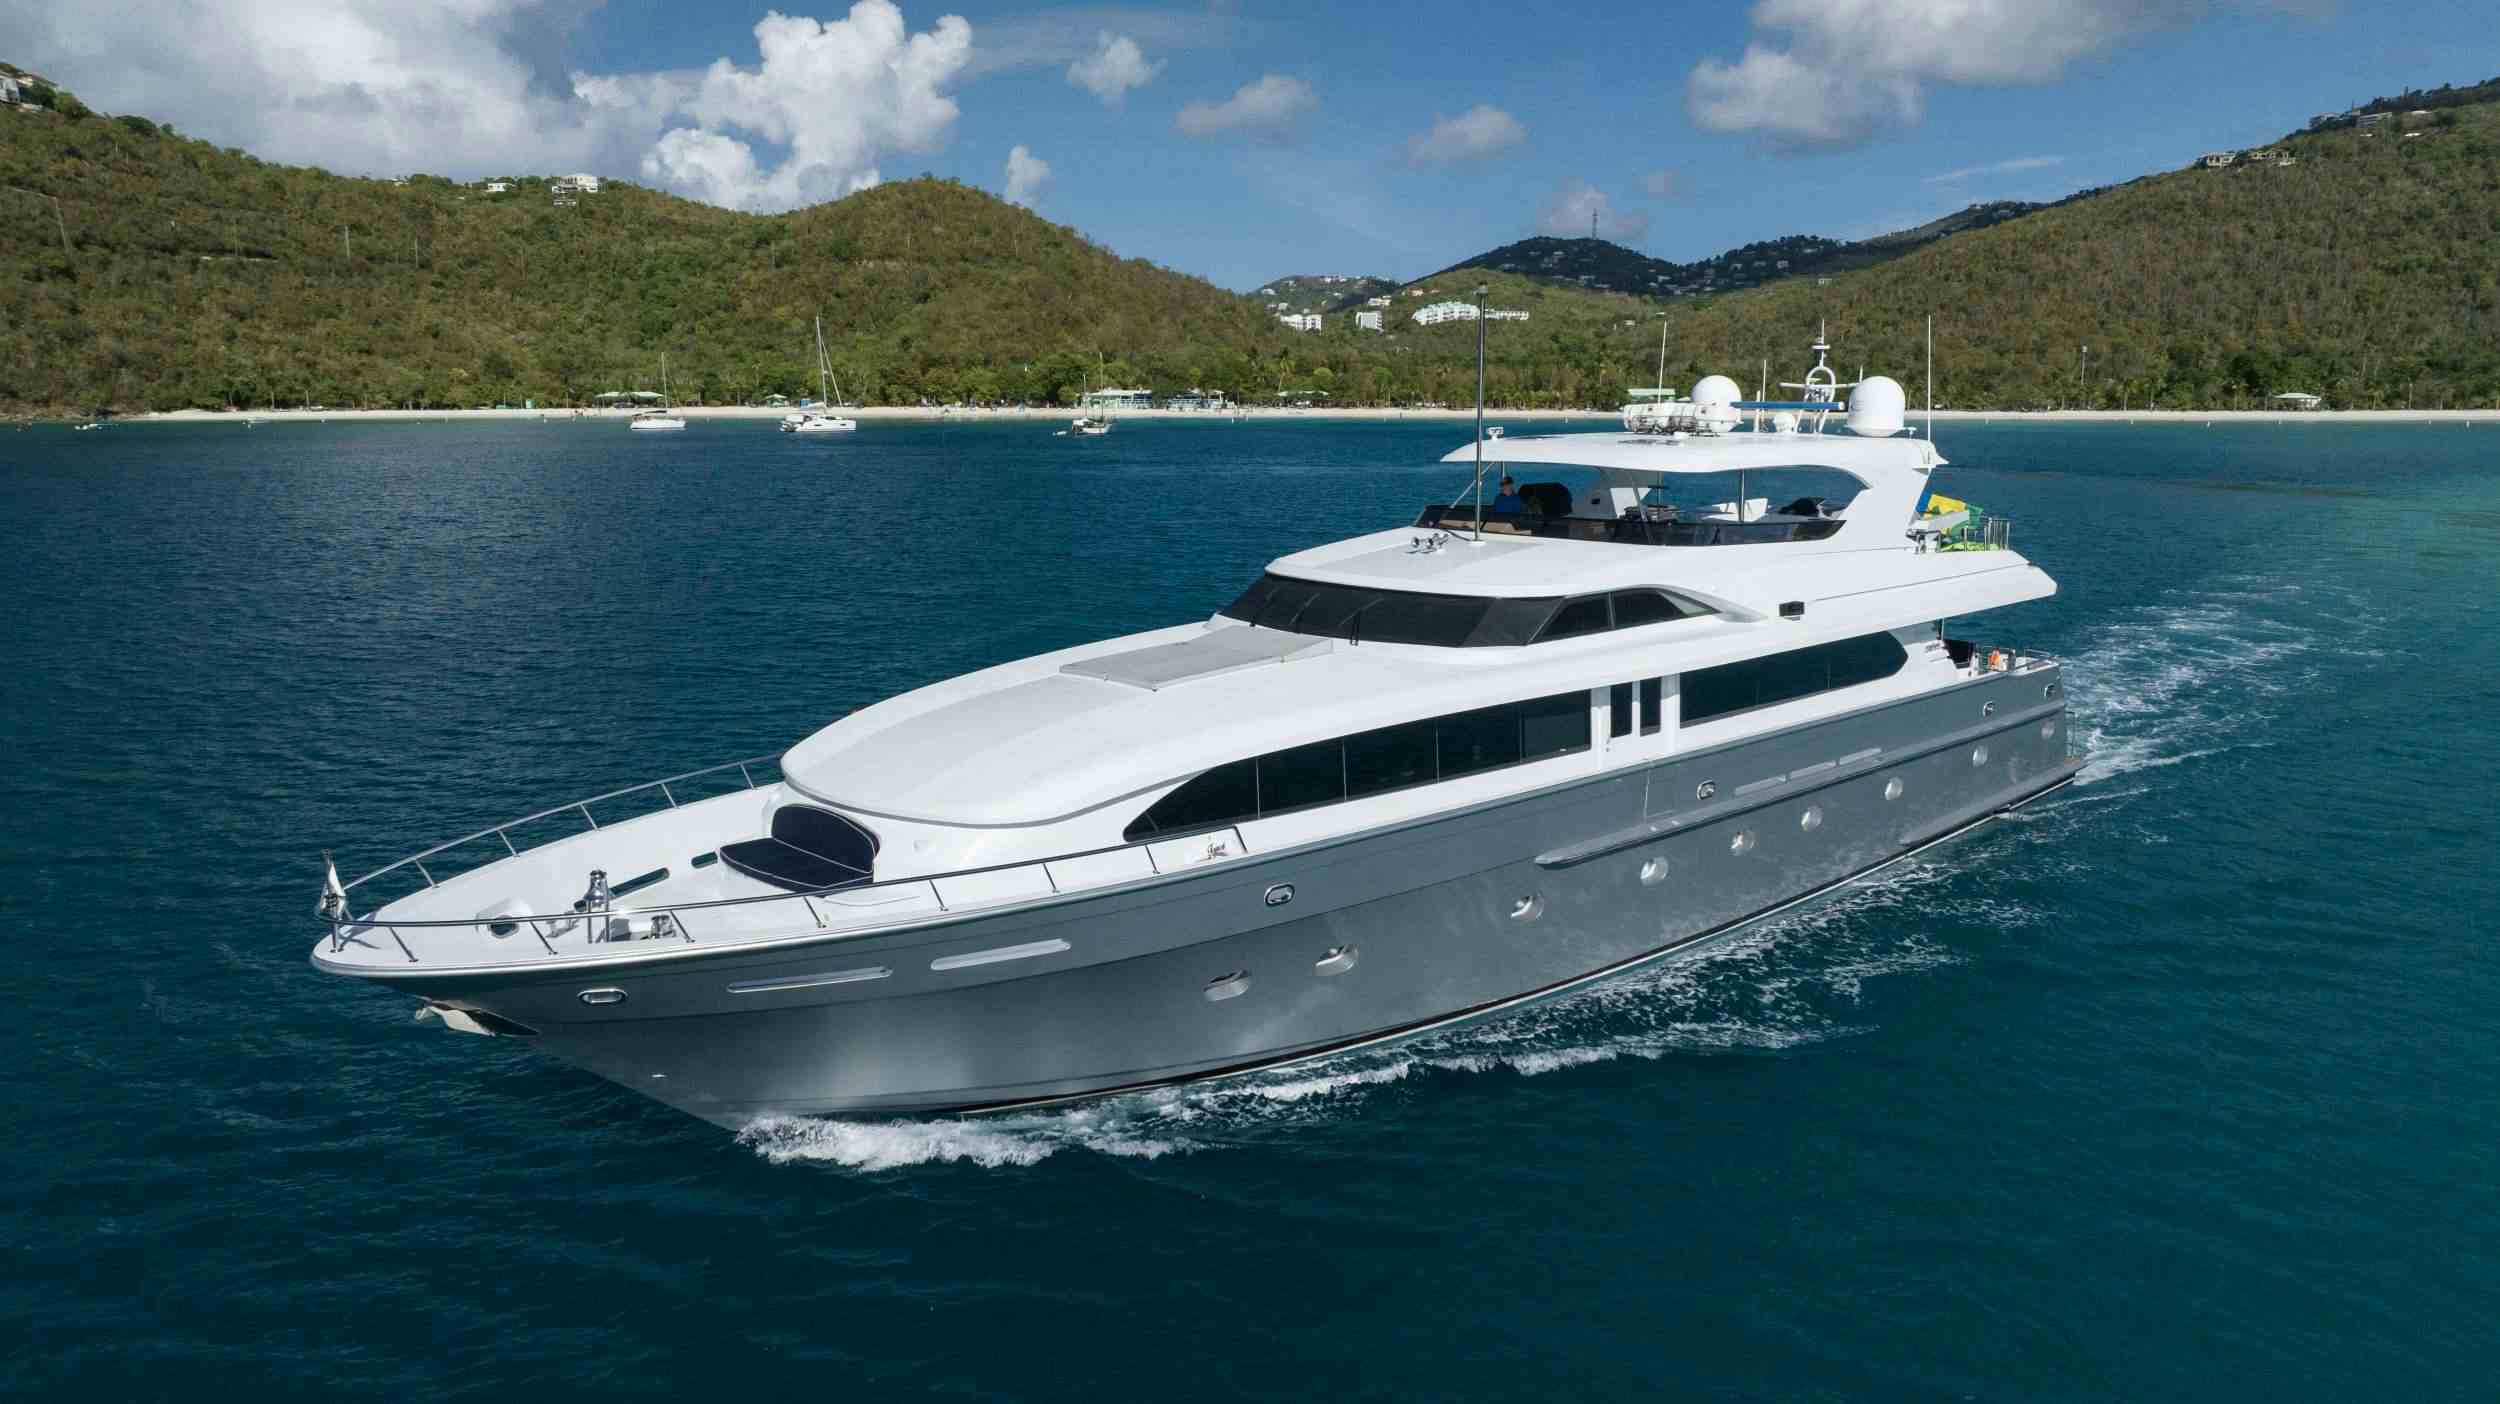 OUTTA TOUCH - Yacht Charter East End Bay & Boat hire in Caribbean Virgin Islands 1